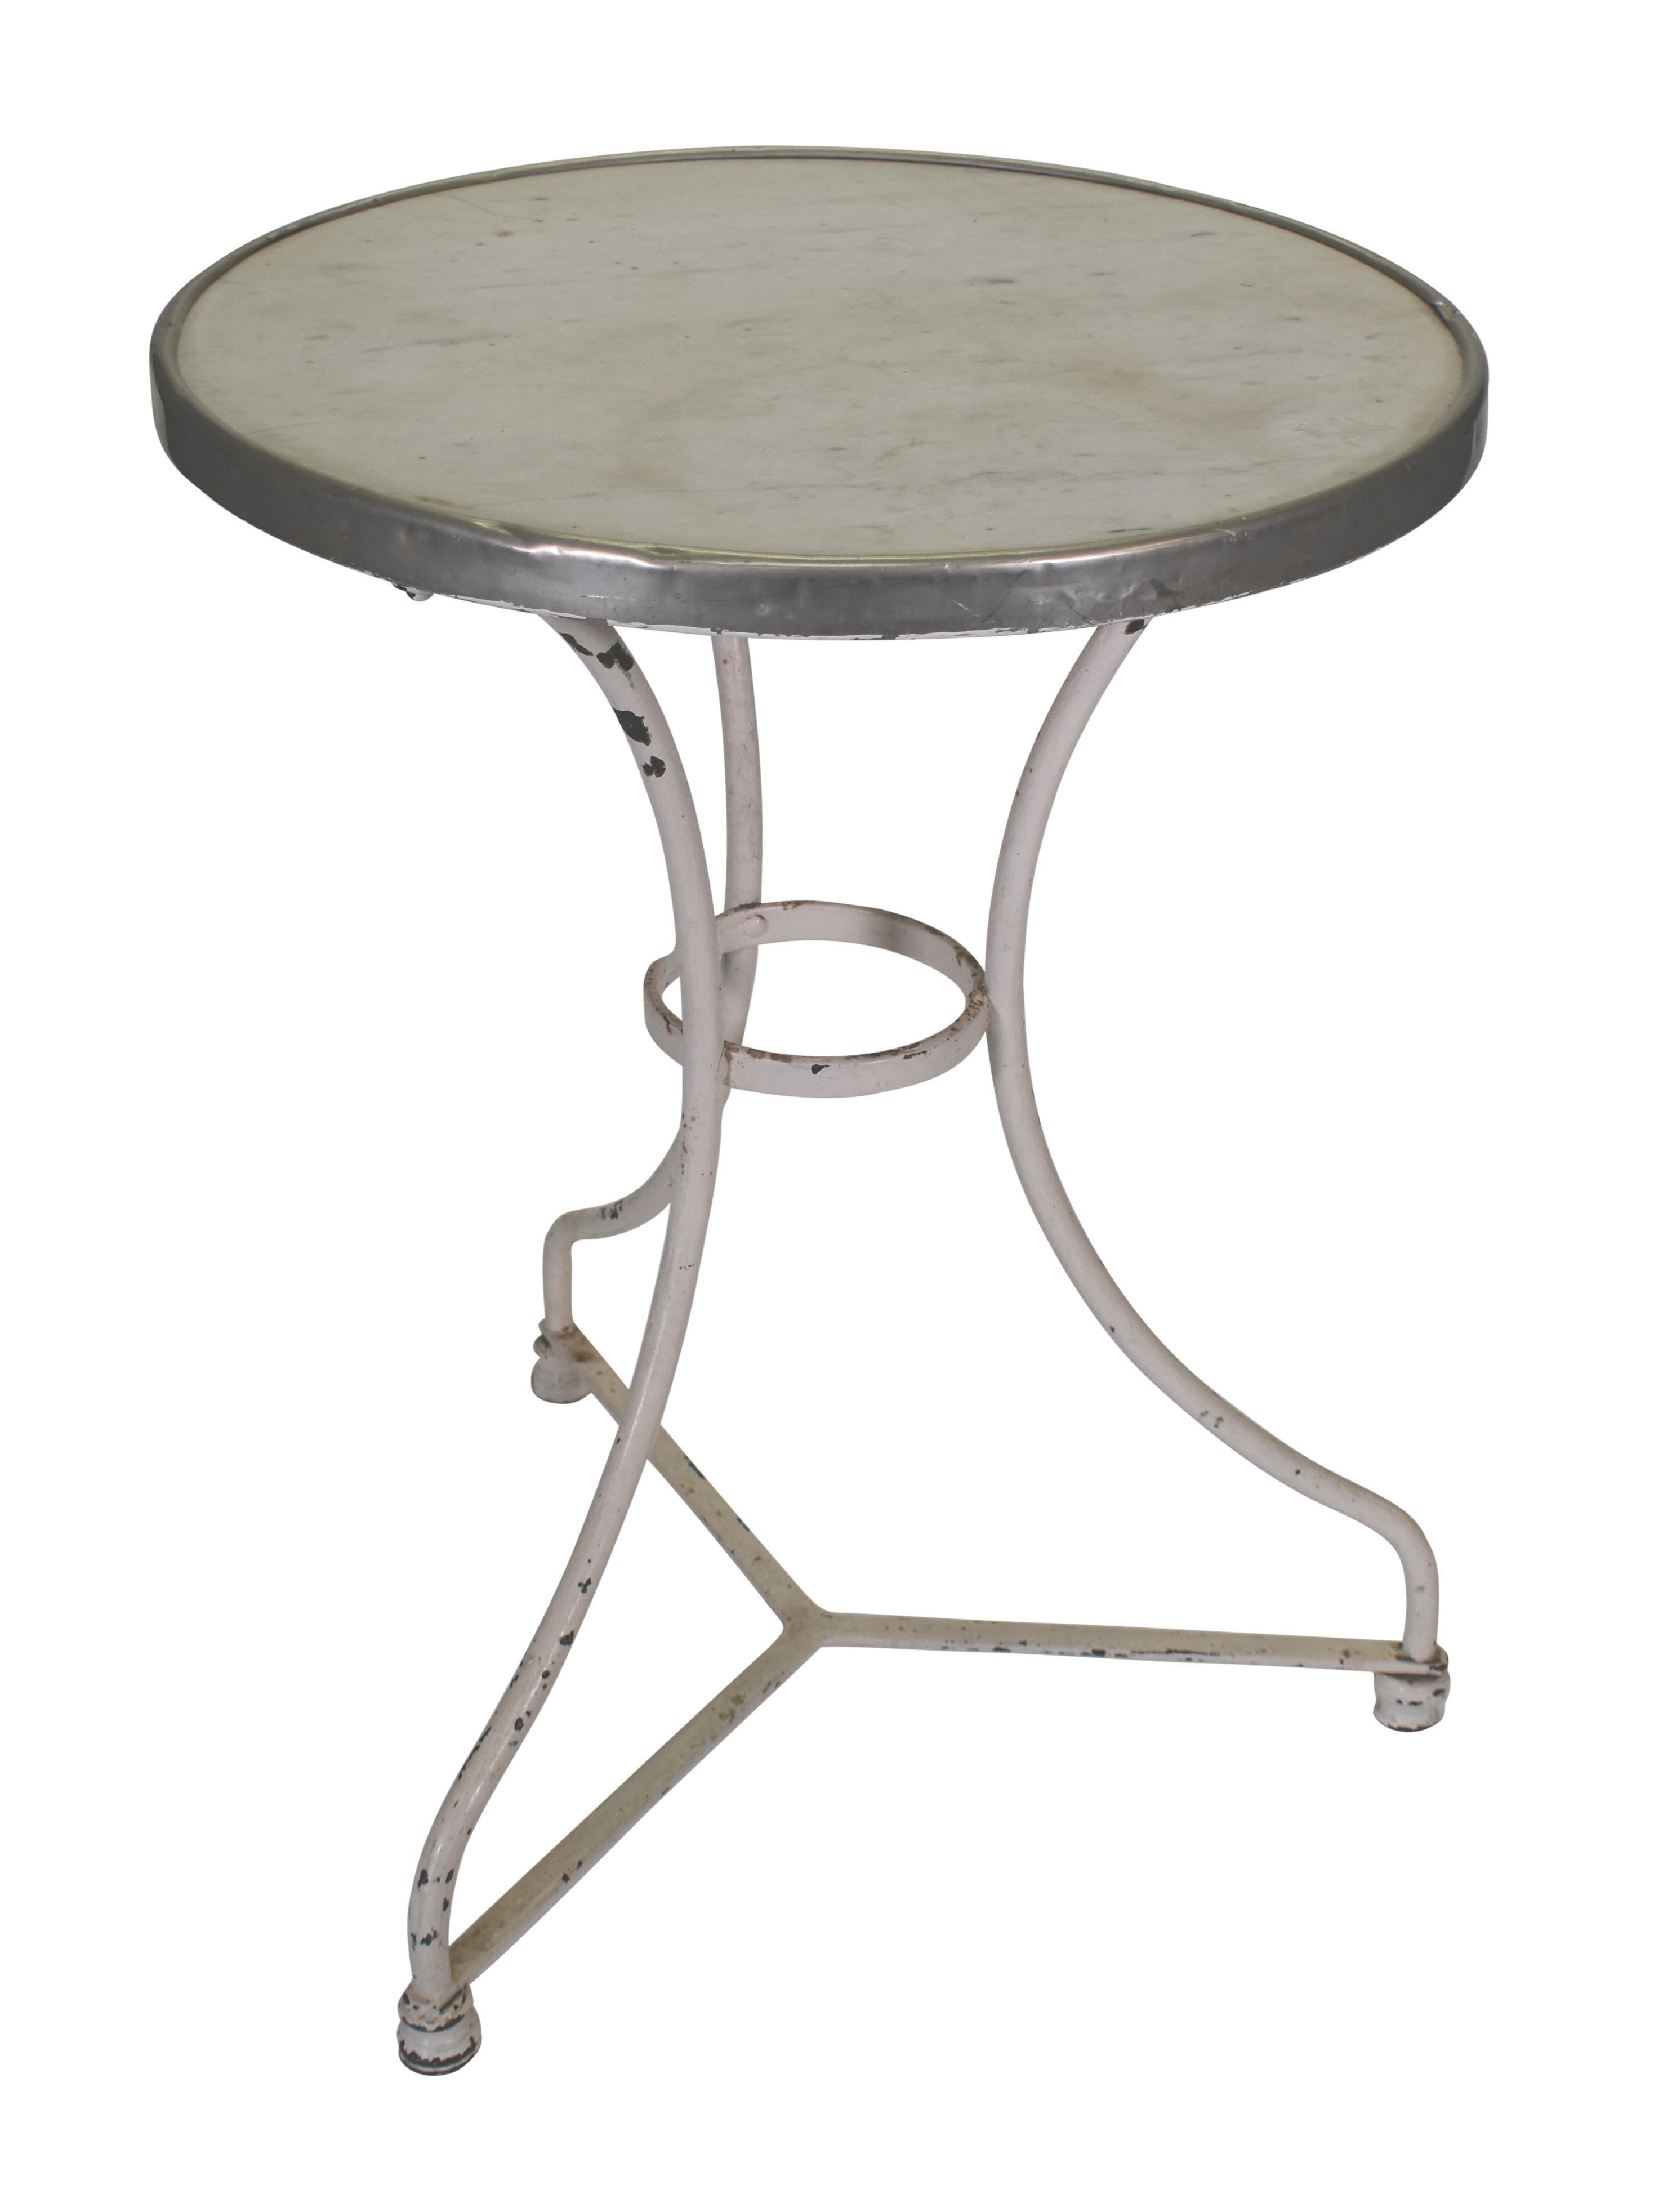 The marble top and white weathered patina on this bistro table that is perfectly sized for a side table or 2-person bistro.